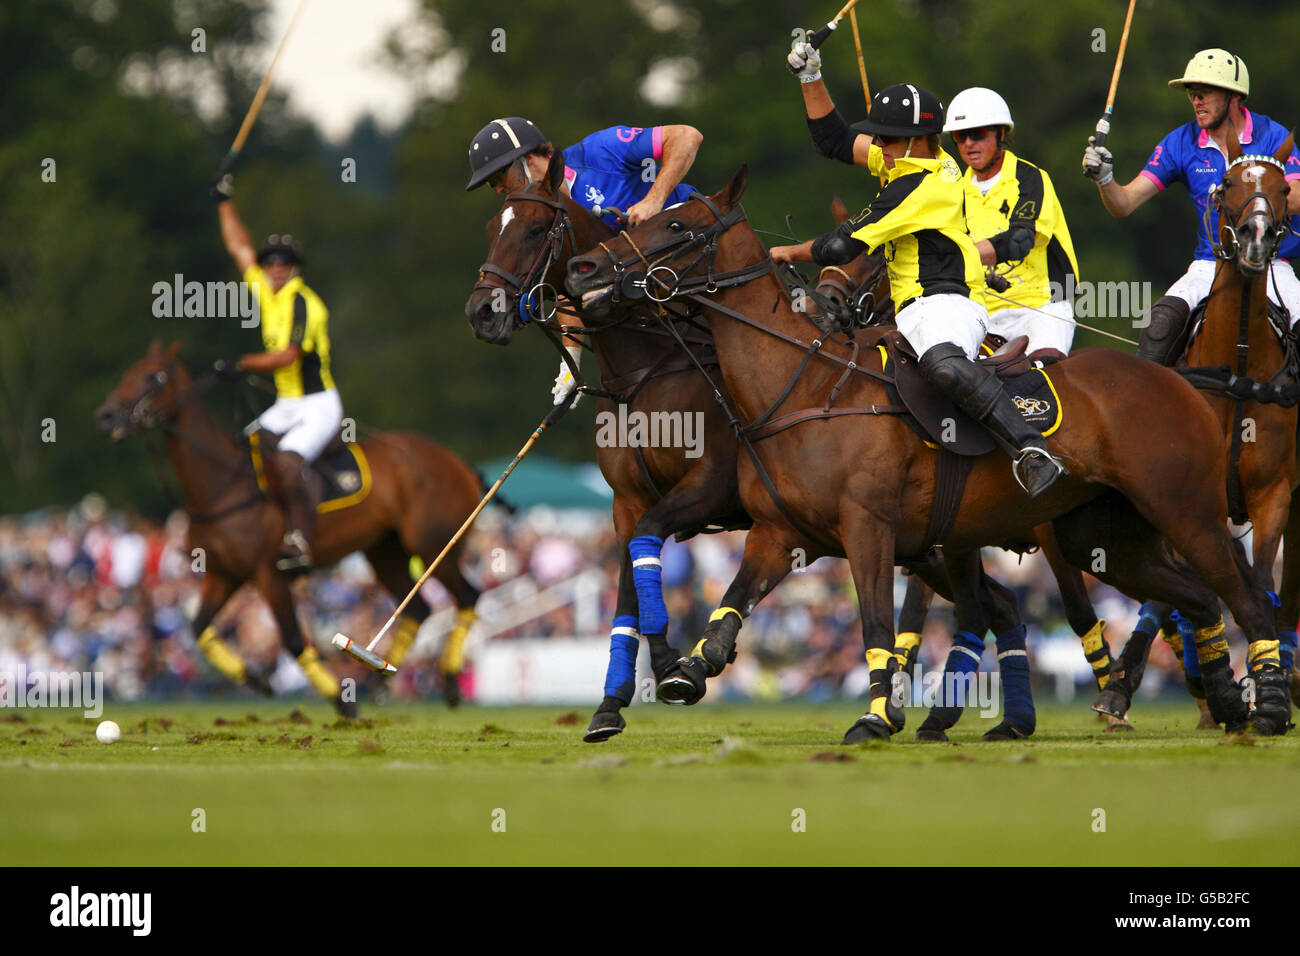 Action from West Sussex Cortium (yellow and black) and El Remanso in the Veuve Clicquot Gold Cup Final at Cowdray Polo Lawns in Midhurst, West Sussex. Stock Photo